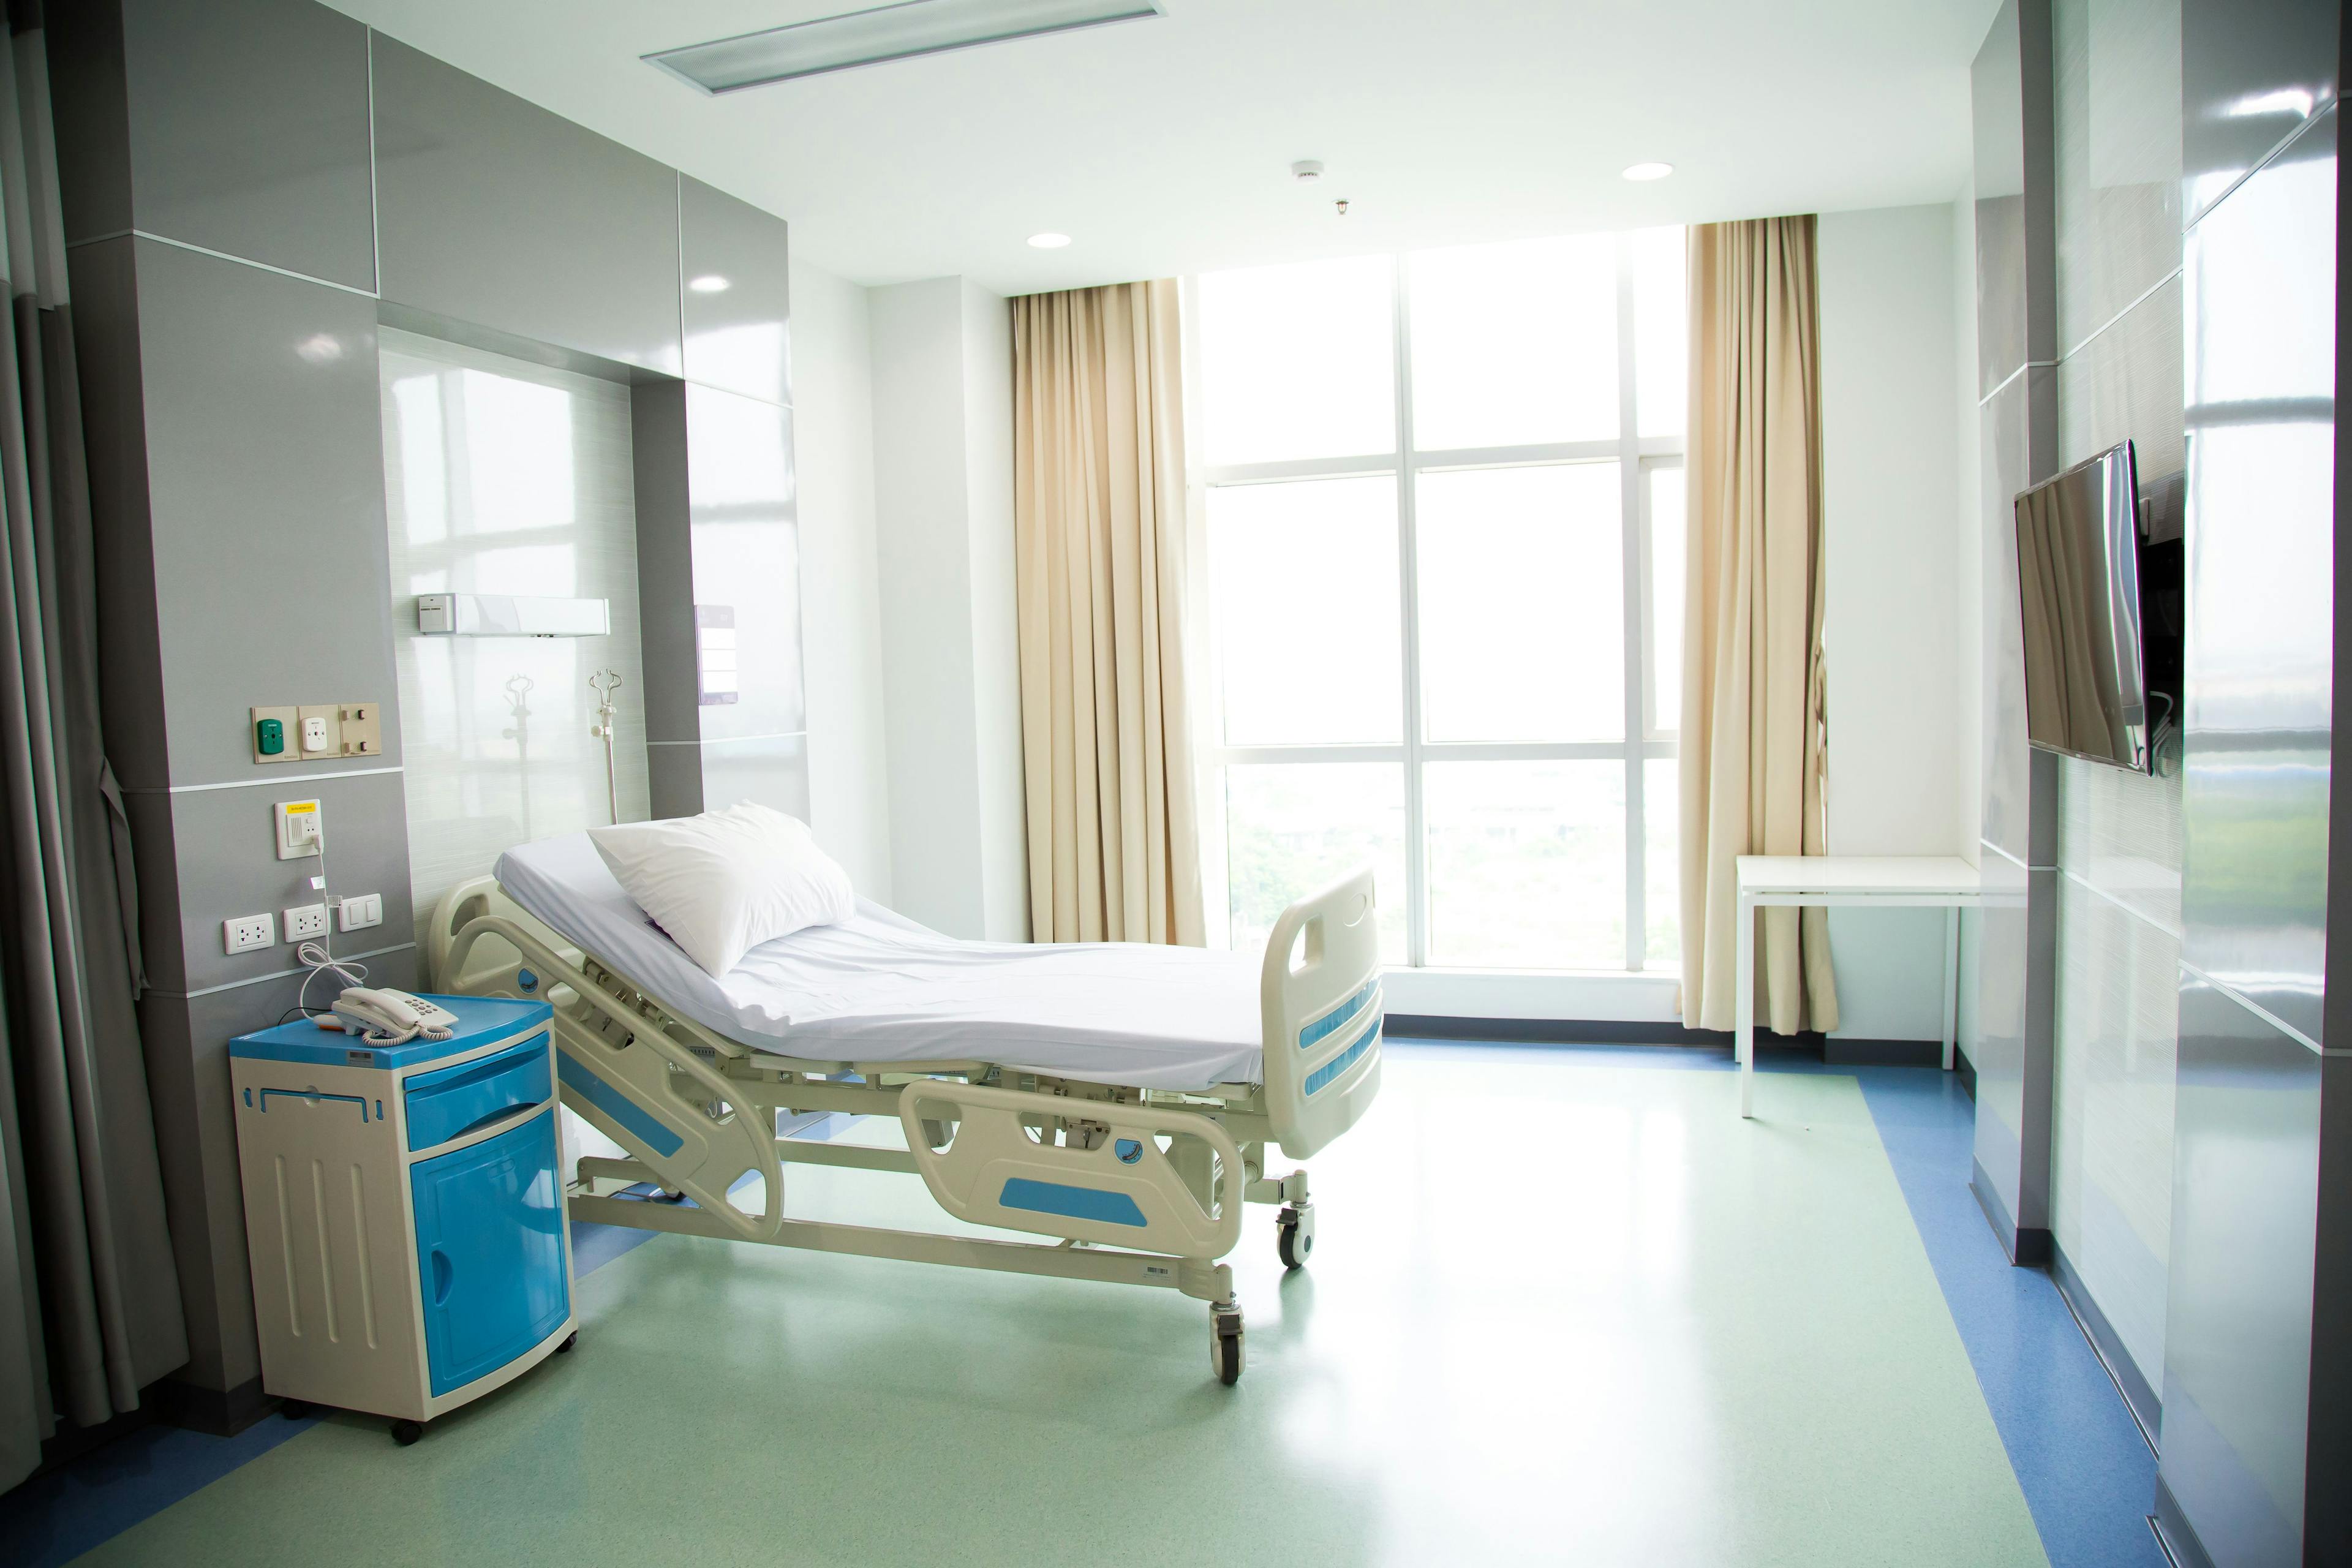 Hospitals struggling with higher expenses, margin declines: report